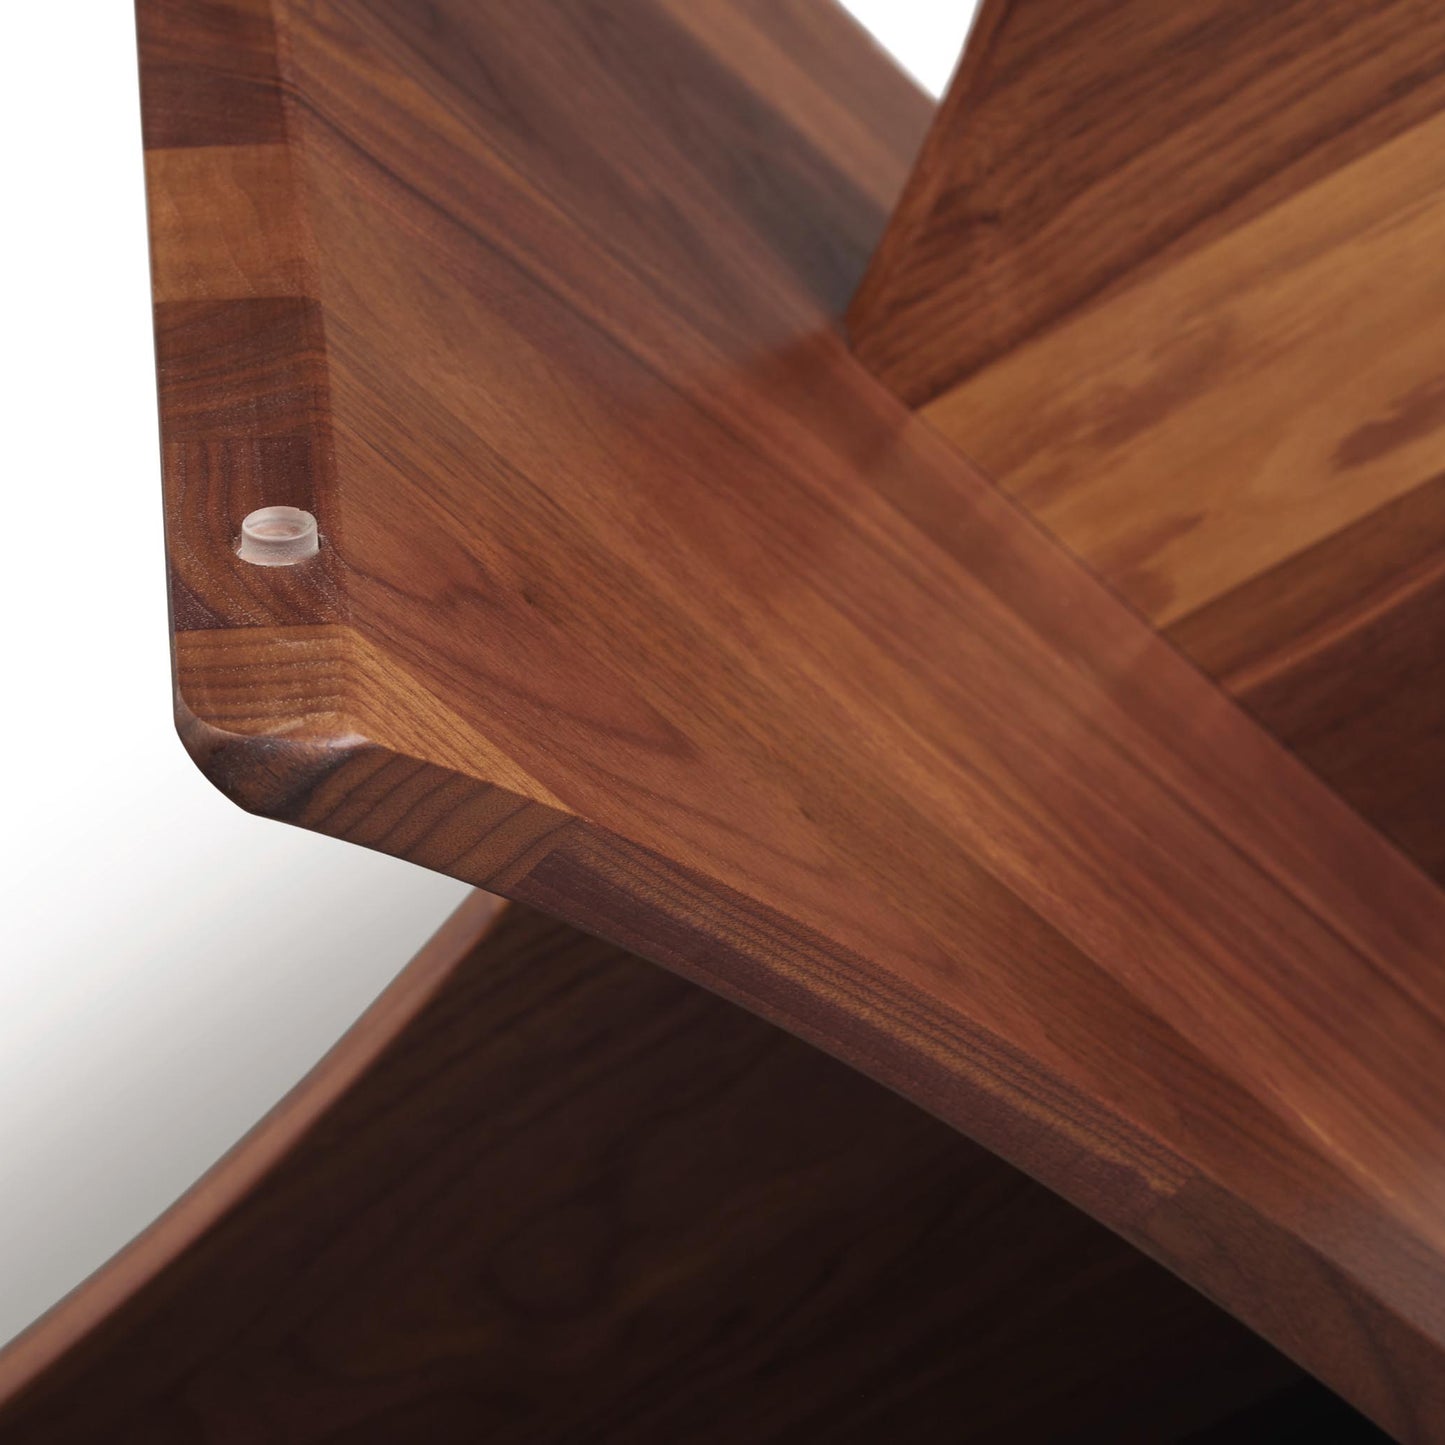 Close-up of a Copeland Furniture Planes Round Glass Top Coffee Table corner with visible wood grain details and a transparent silicone corner protector.